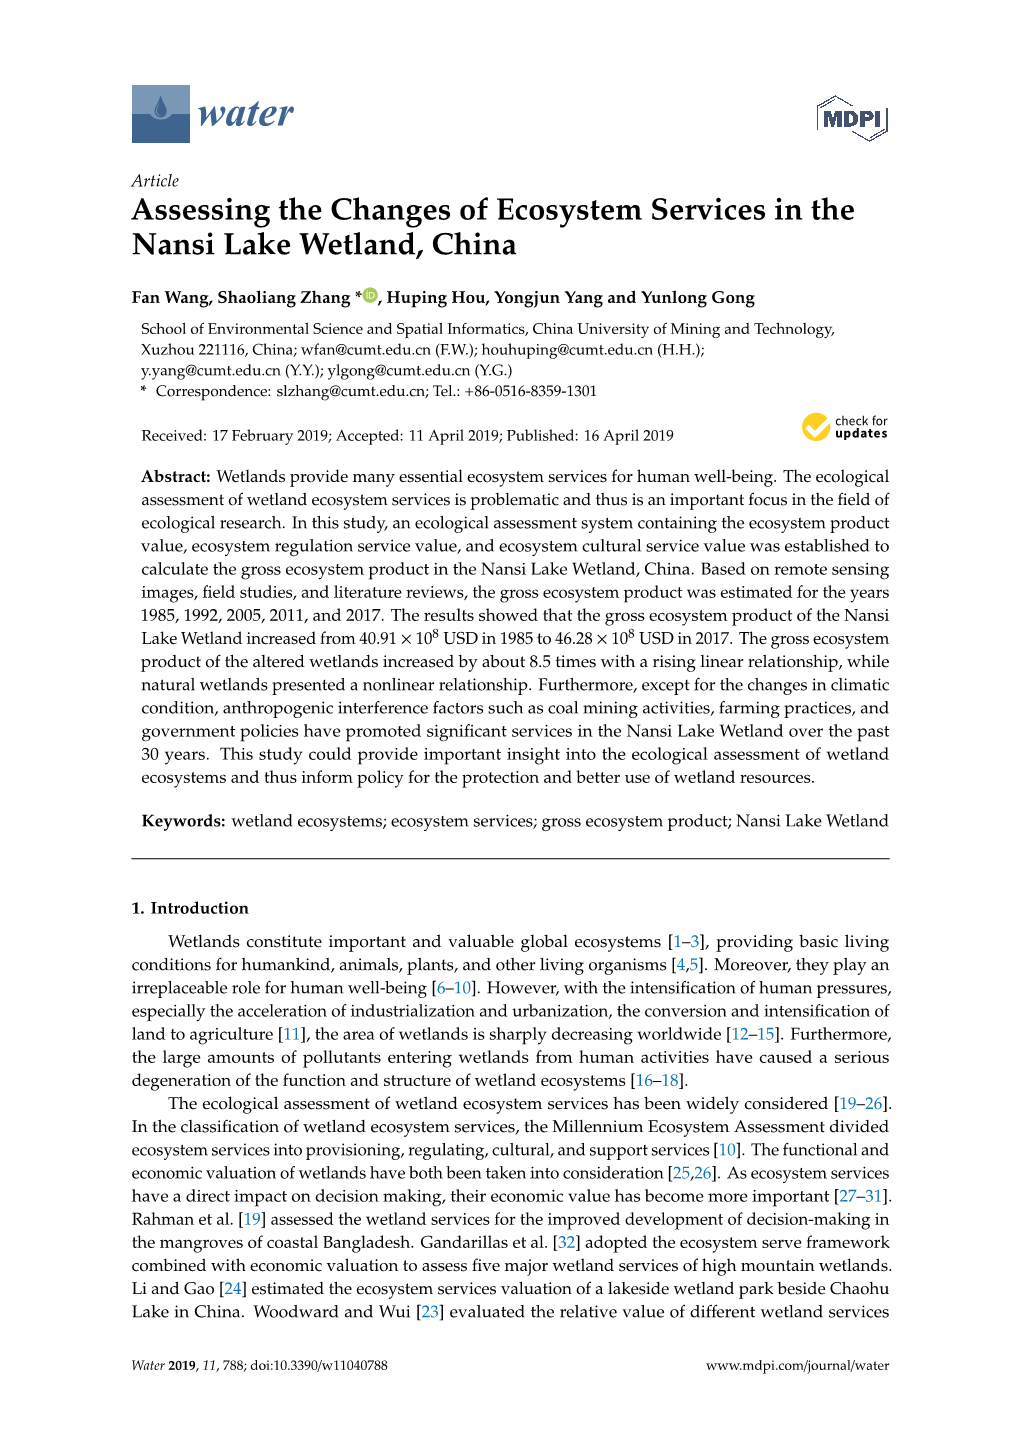 Assessing the Changes of Ecosystem Services in the Nansi Lake Wetland, China